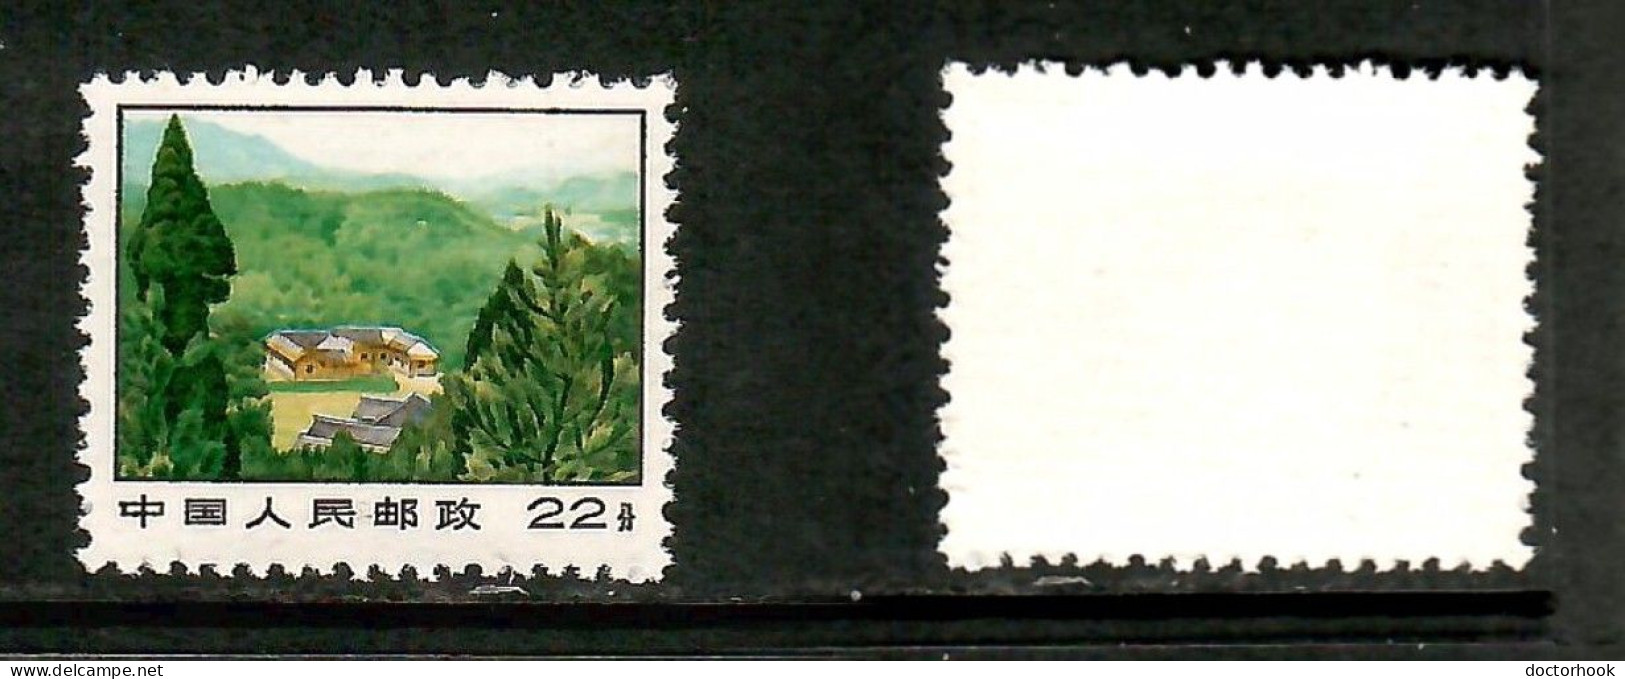 PEOPLES REPUBLIC Of CHINA   Scott # 1032* MINT NO GUM AS ISSUED (CONDITION AS PER SCAN) (Stamp Scan # 1012-8) - Nuevos